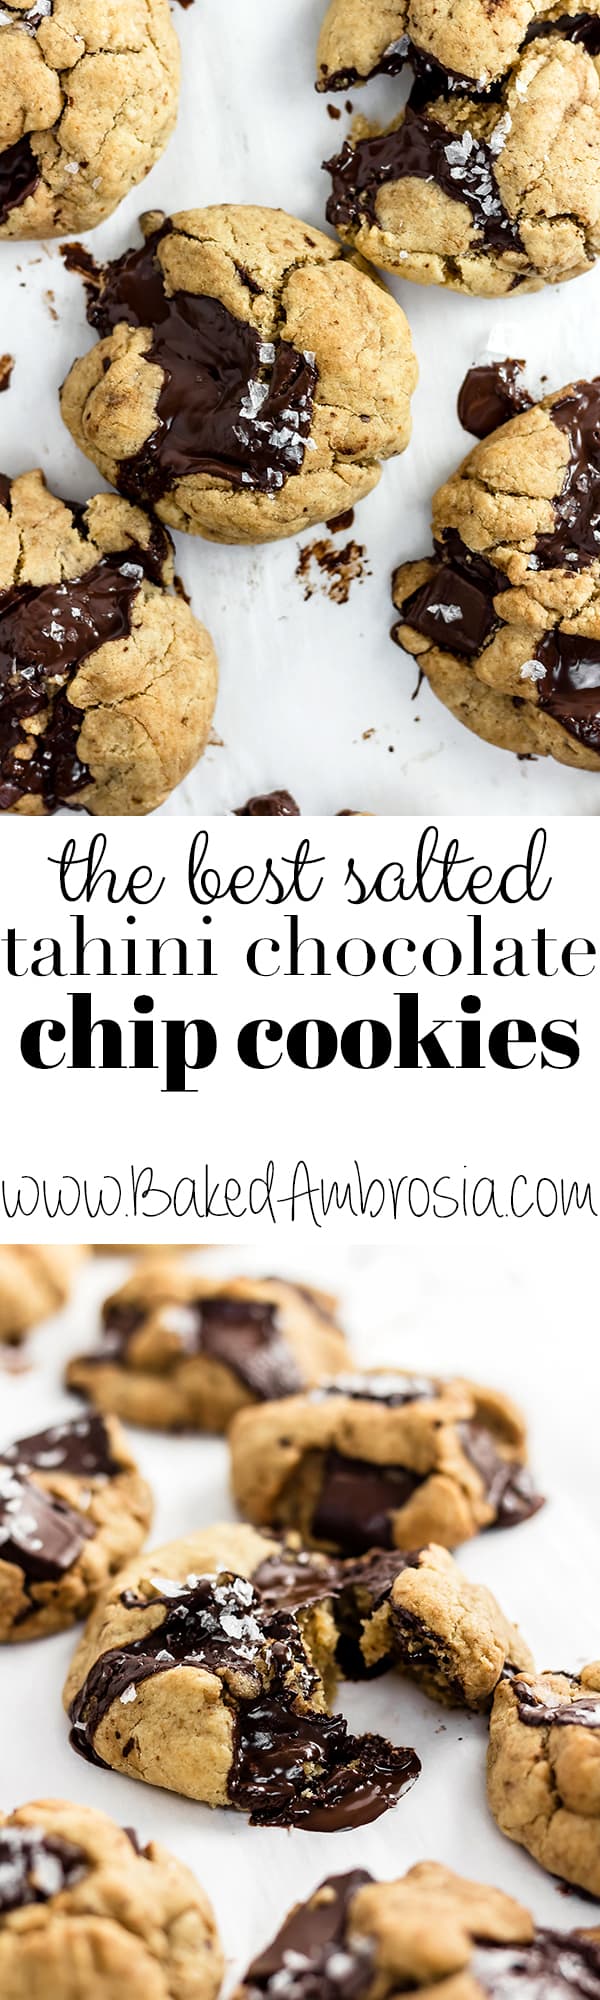 The BEST Tahini Chocolate Chip Cookies - Baked Ambrosia